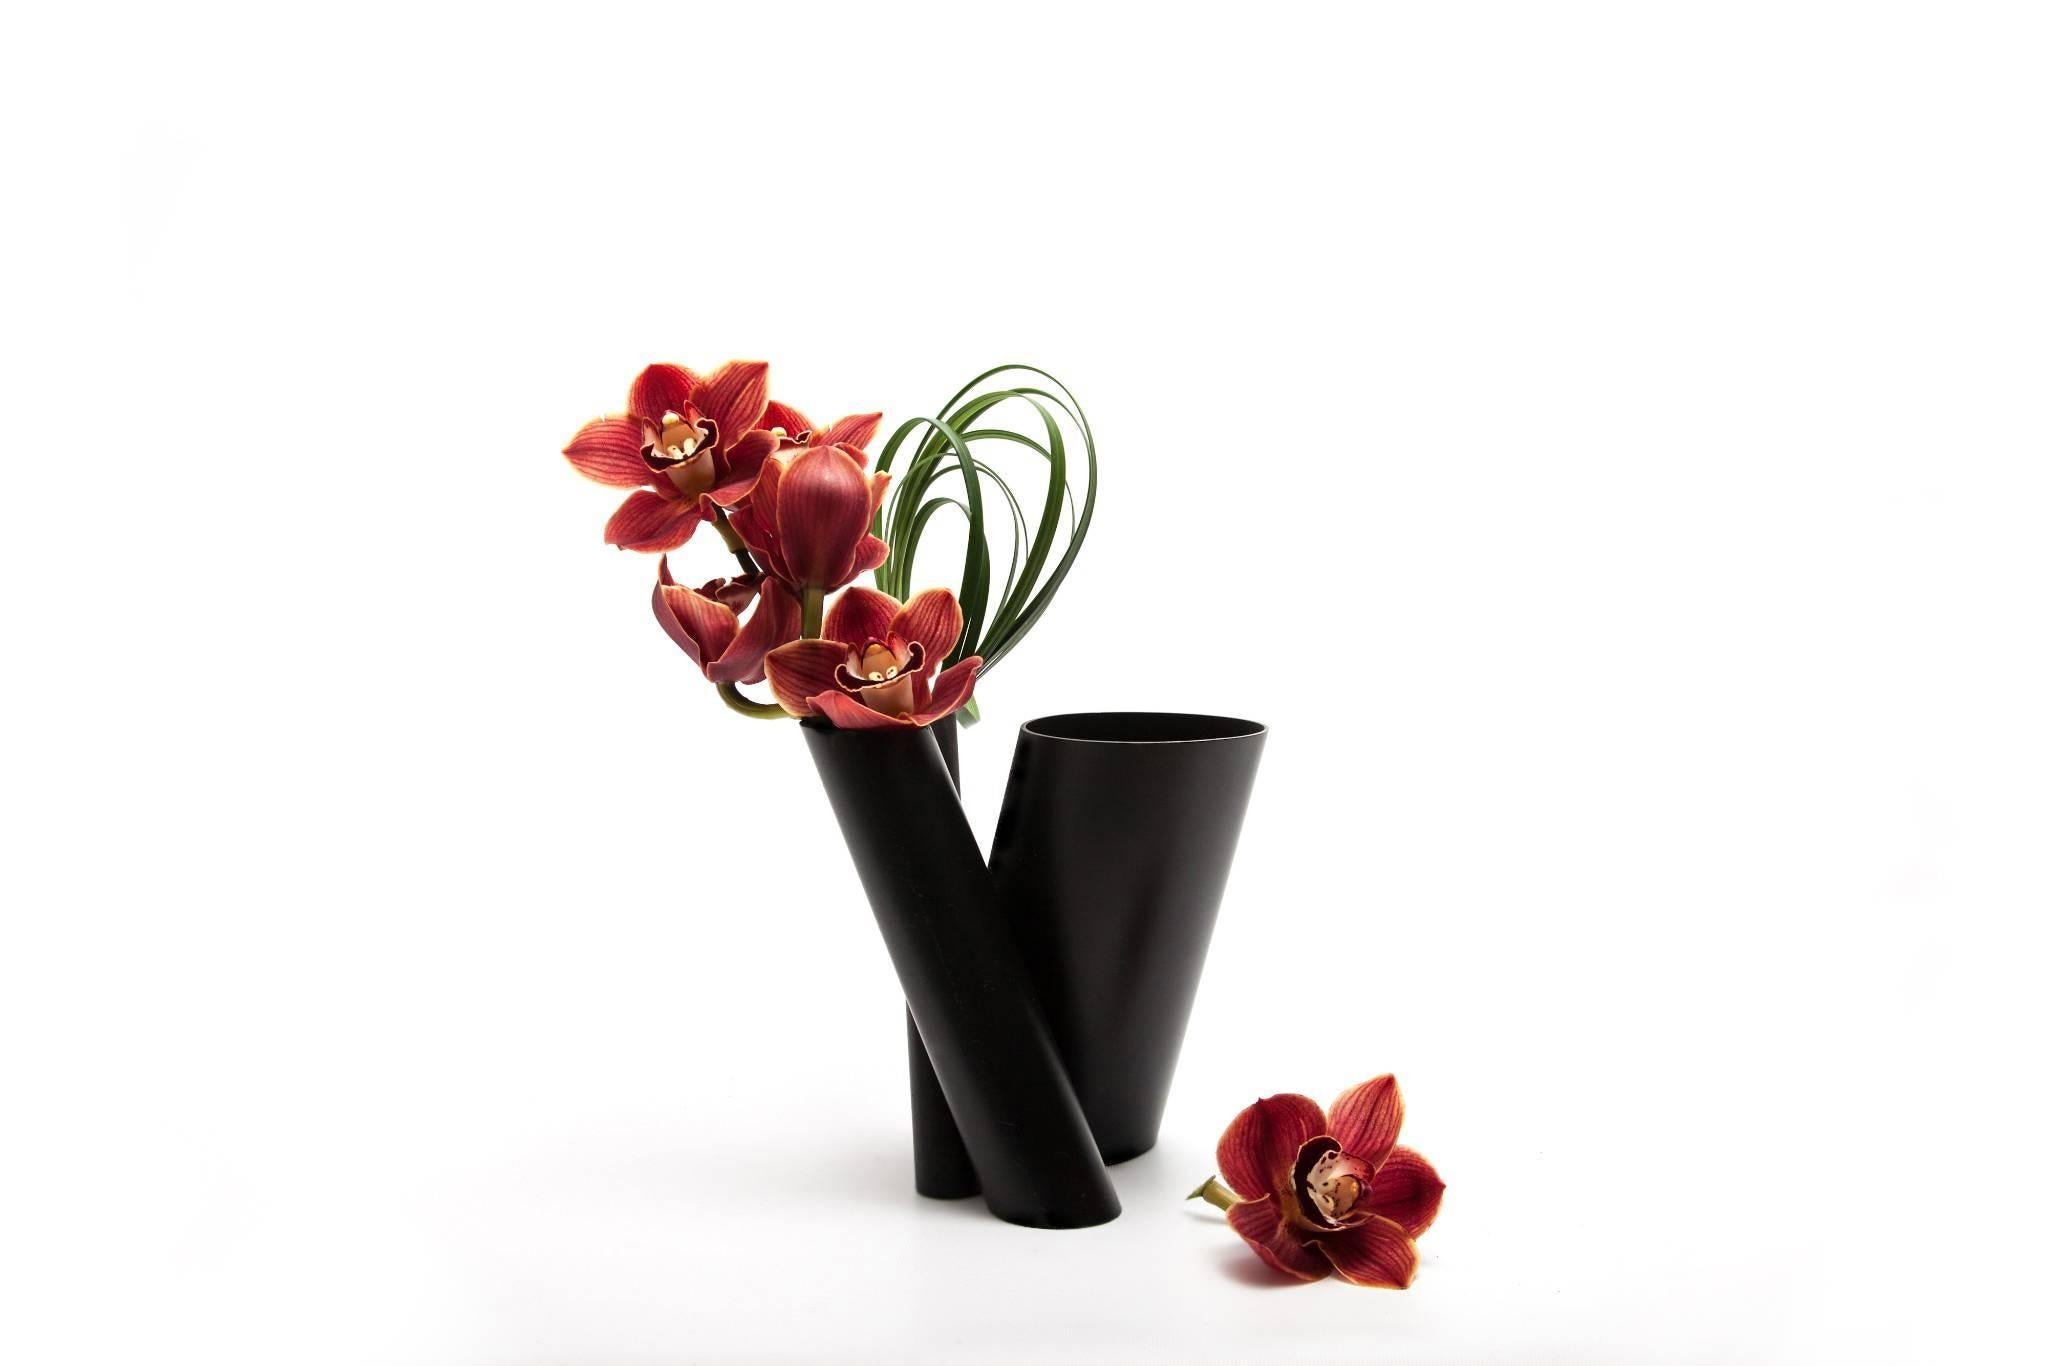 Three vases in one, composed of a series of black minimal hand-painted stainless steel tubes in various dimensions and cut on the bias, the contemporary Bana Triple vase can uniquely accommodate a single stem to full flower arrangements separately